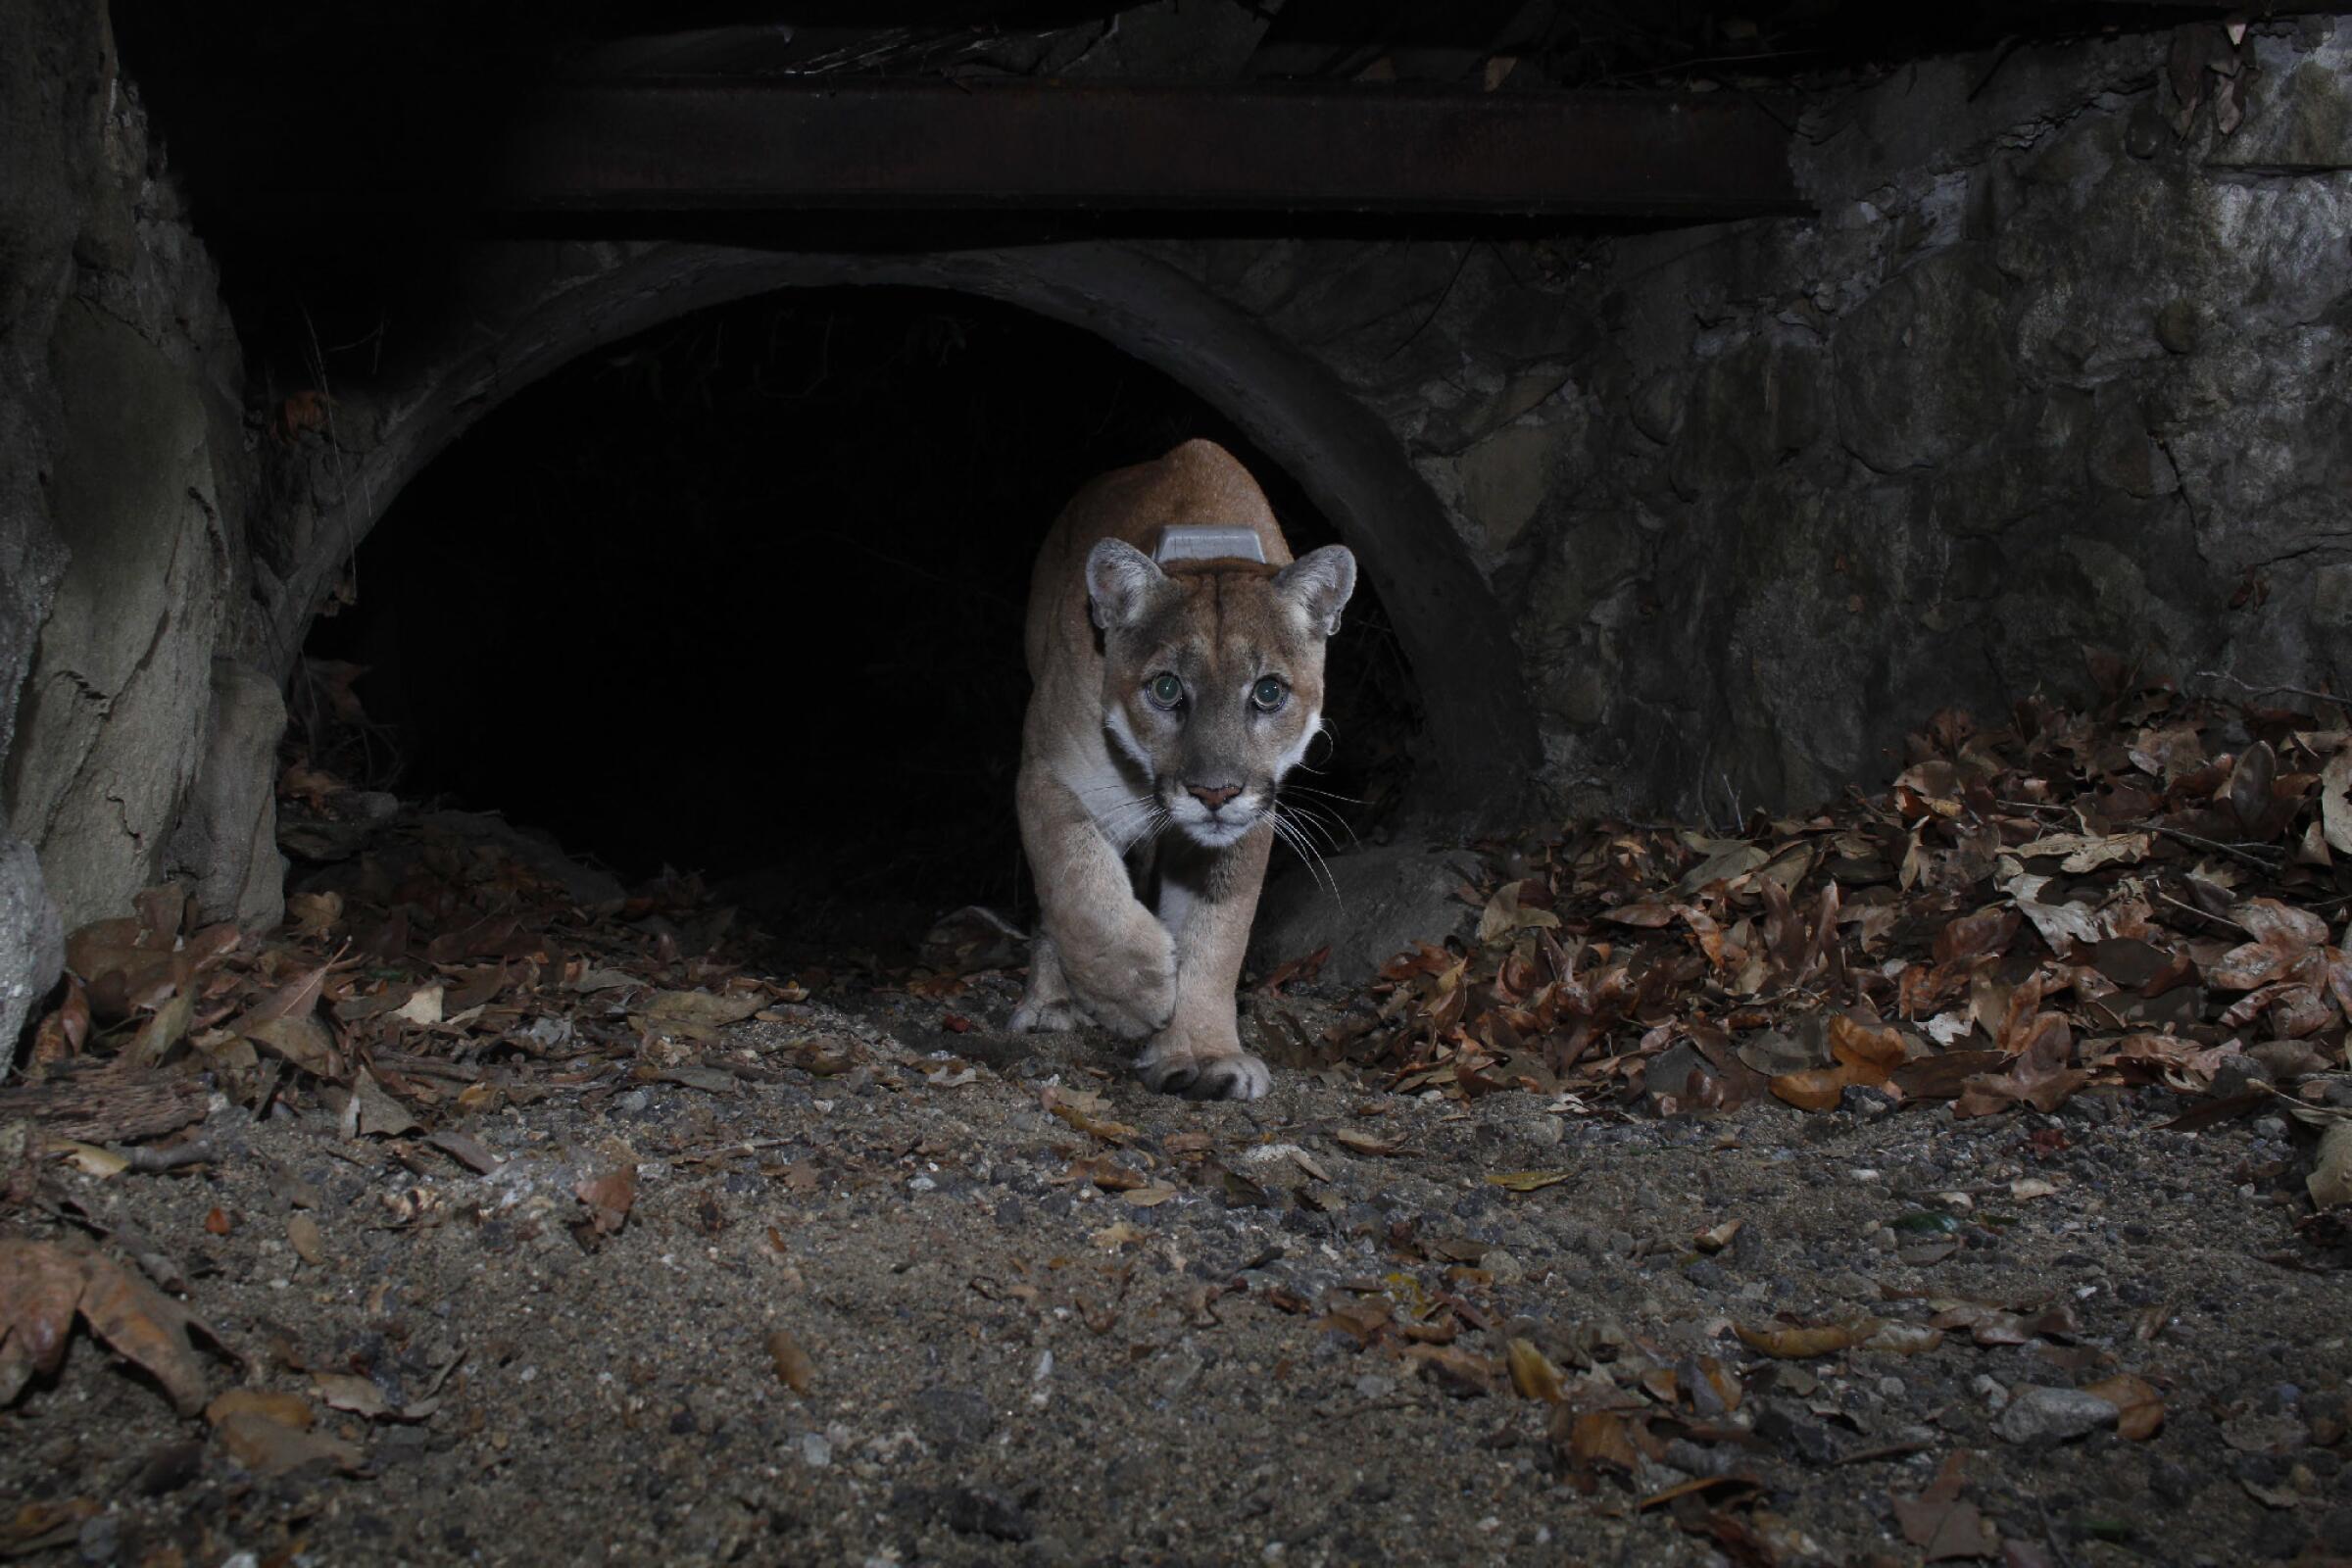 Mountain lion P-22 emerges from a tunnel toward the camera. A radio collar is seen on its neck.